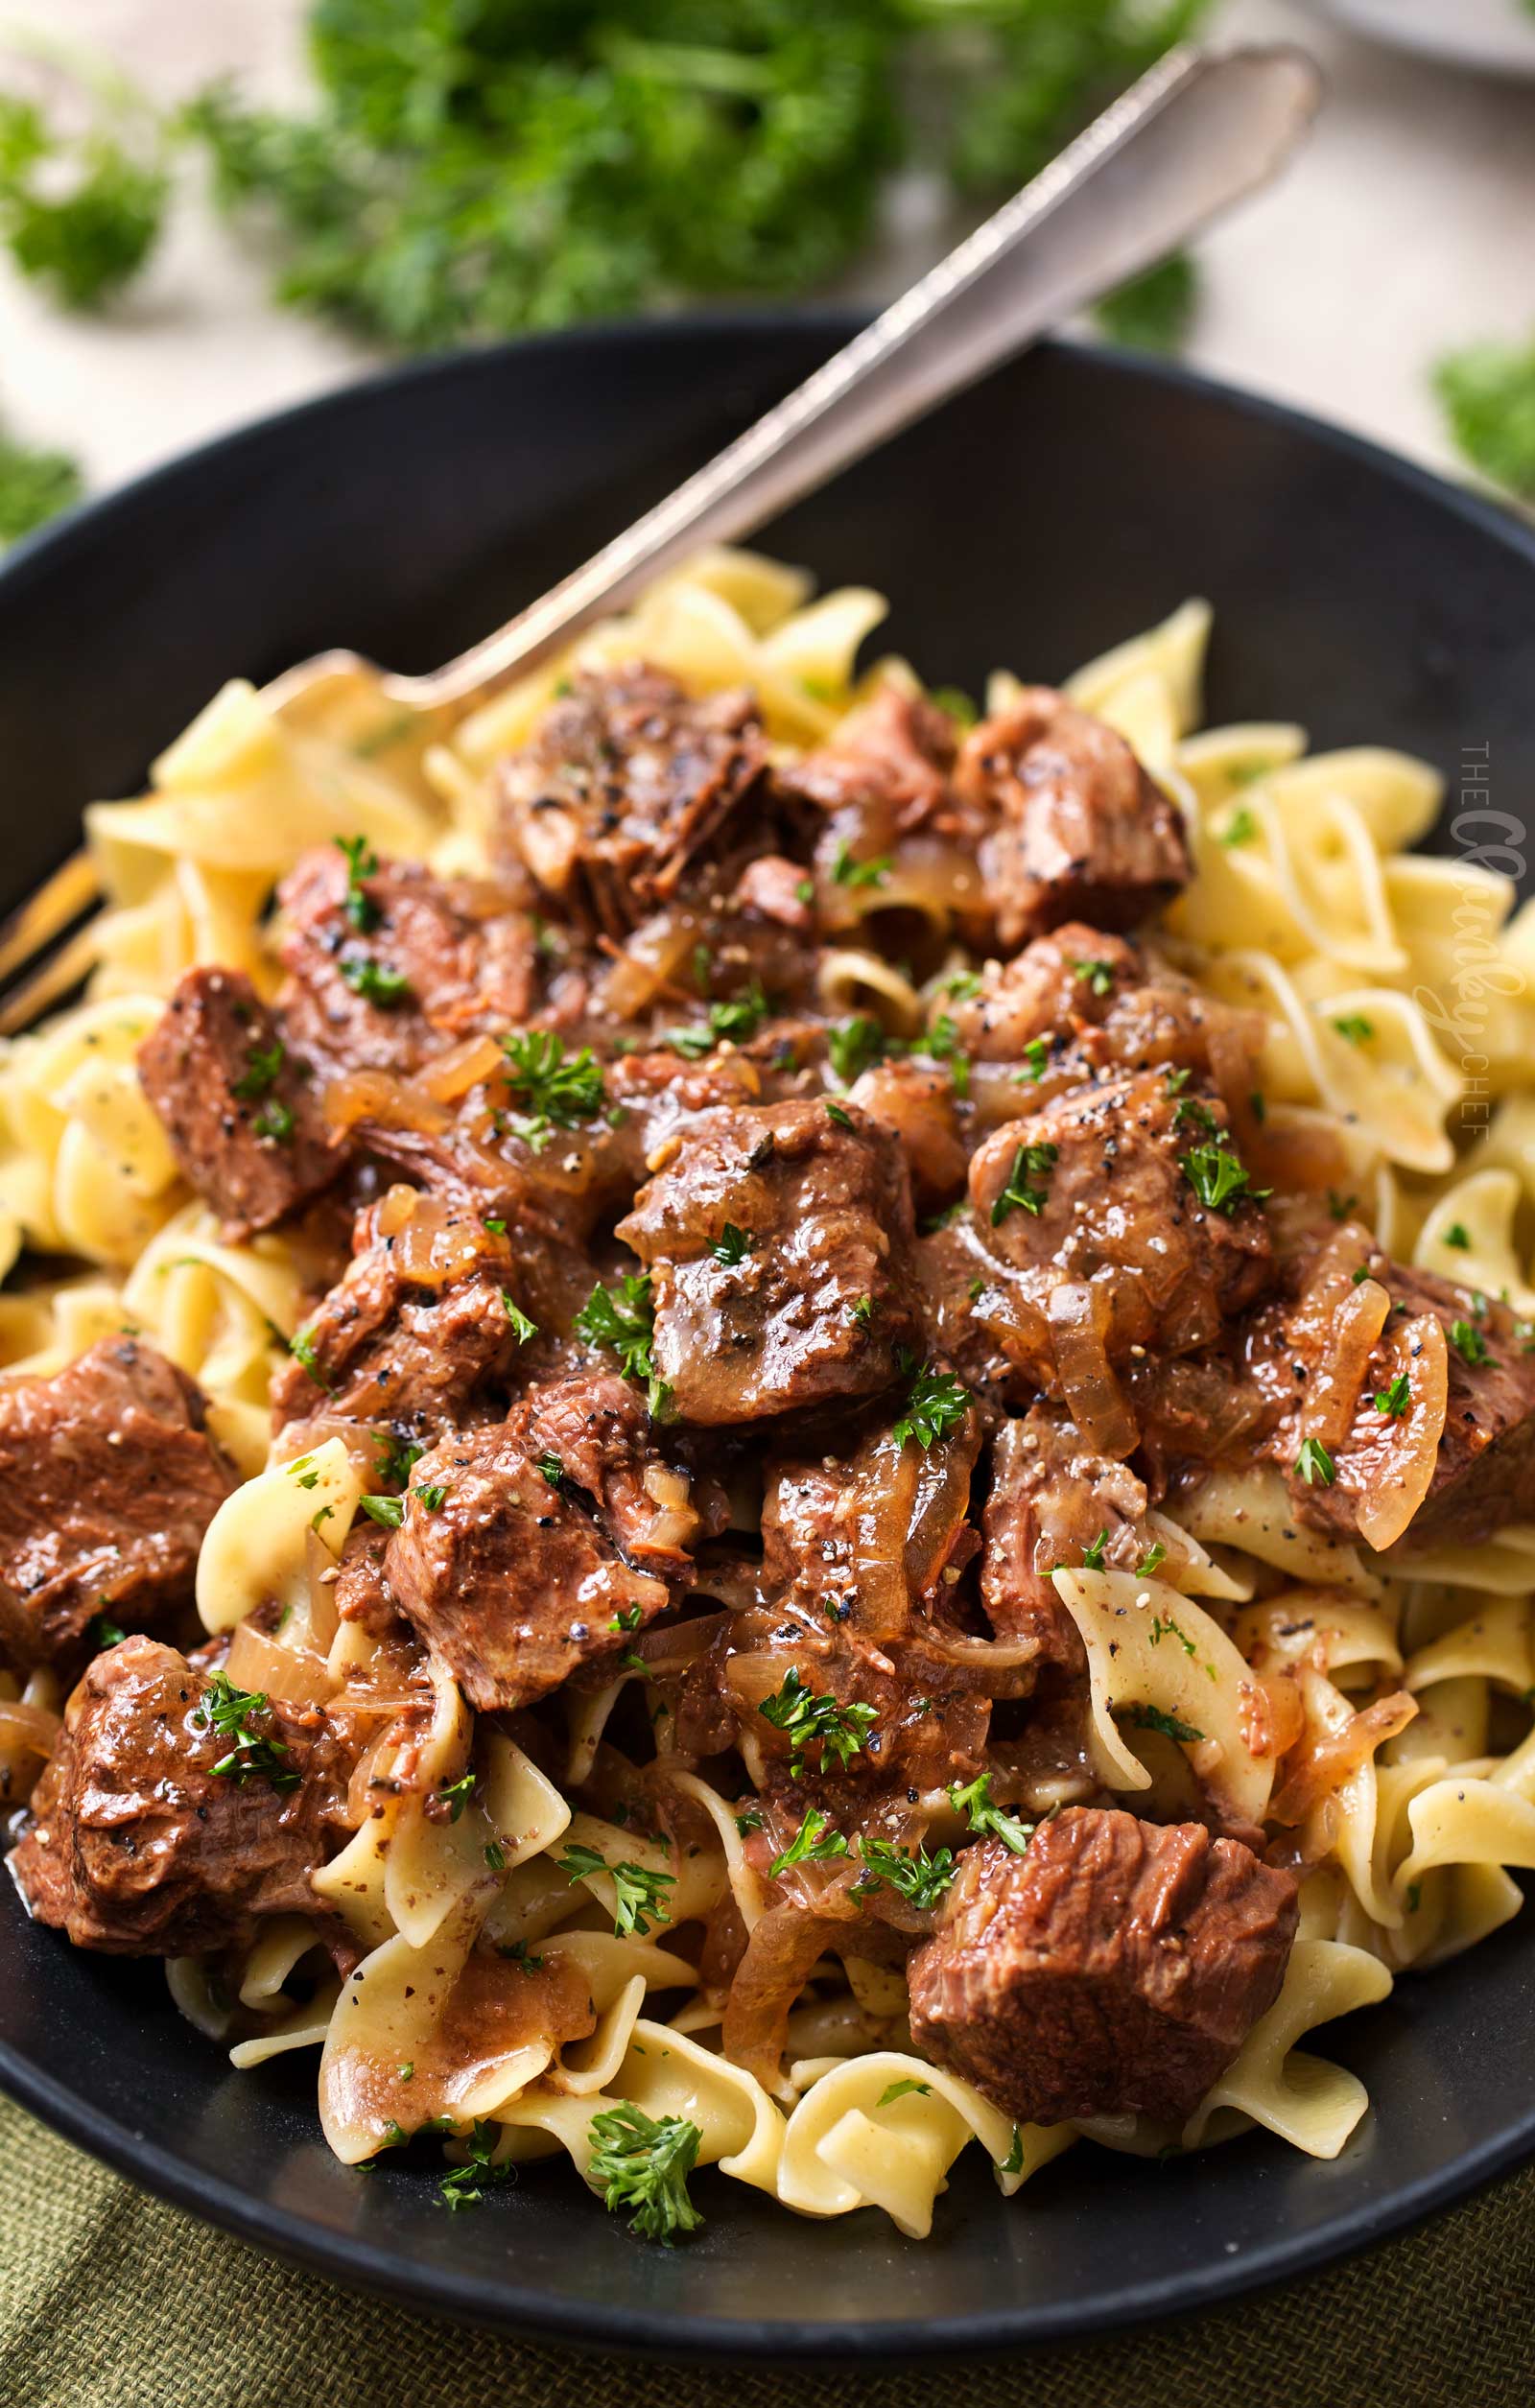 Drunken Slow Cooker Beef Stew (Beef Carbonnade) | Belgium comfort food, made easy in the slow cooker!  Beef stew made with plenty of sweet onions, herbs and beer... perfect over egg noodles, mashed potatoes, or with a crusty piece of bread! | The Chunky Chef | #beefcarbonnade #beefstew #comfortfoodrecipe #slowcookerrecipes #crockpotrecipes #crockpotbeefrecipes